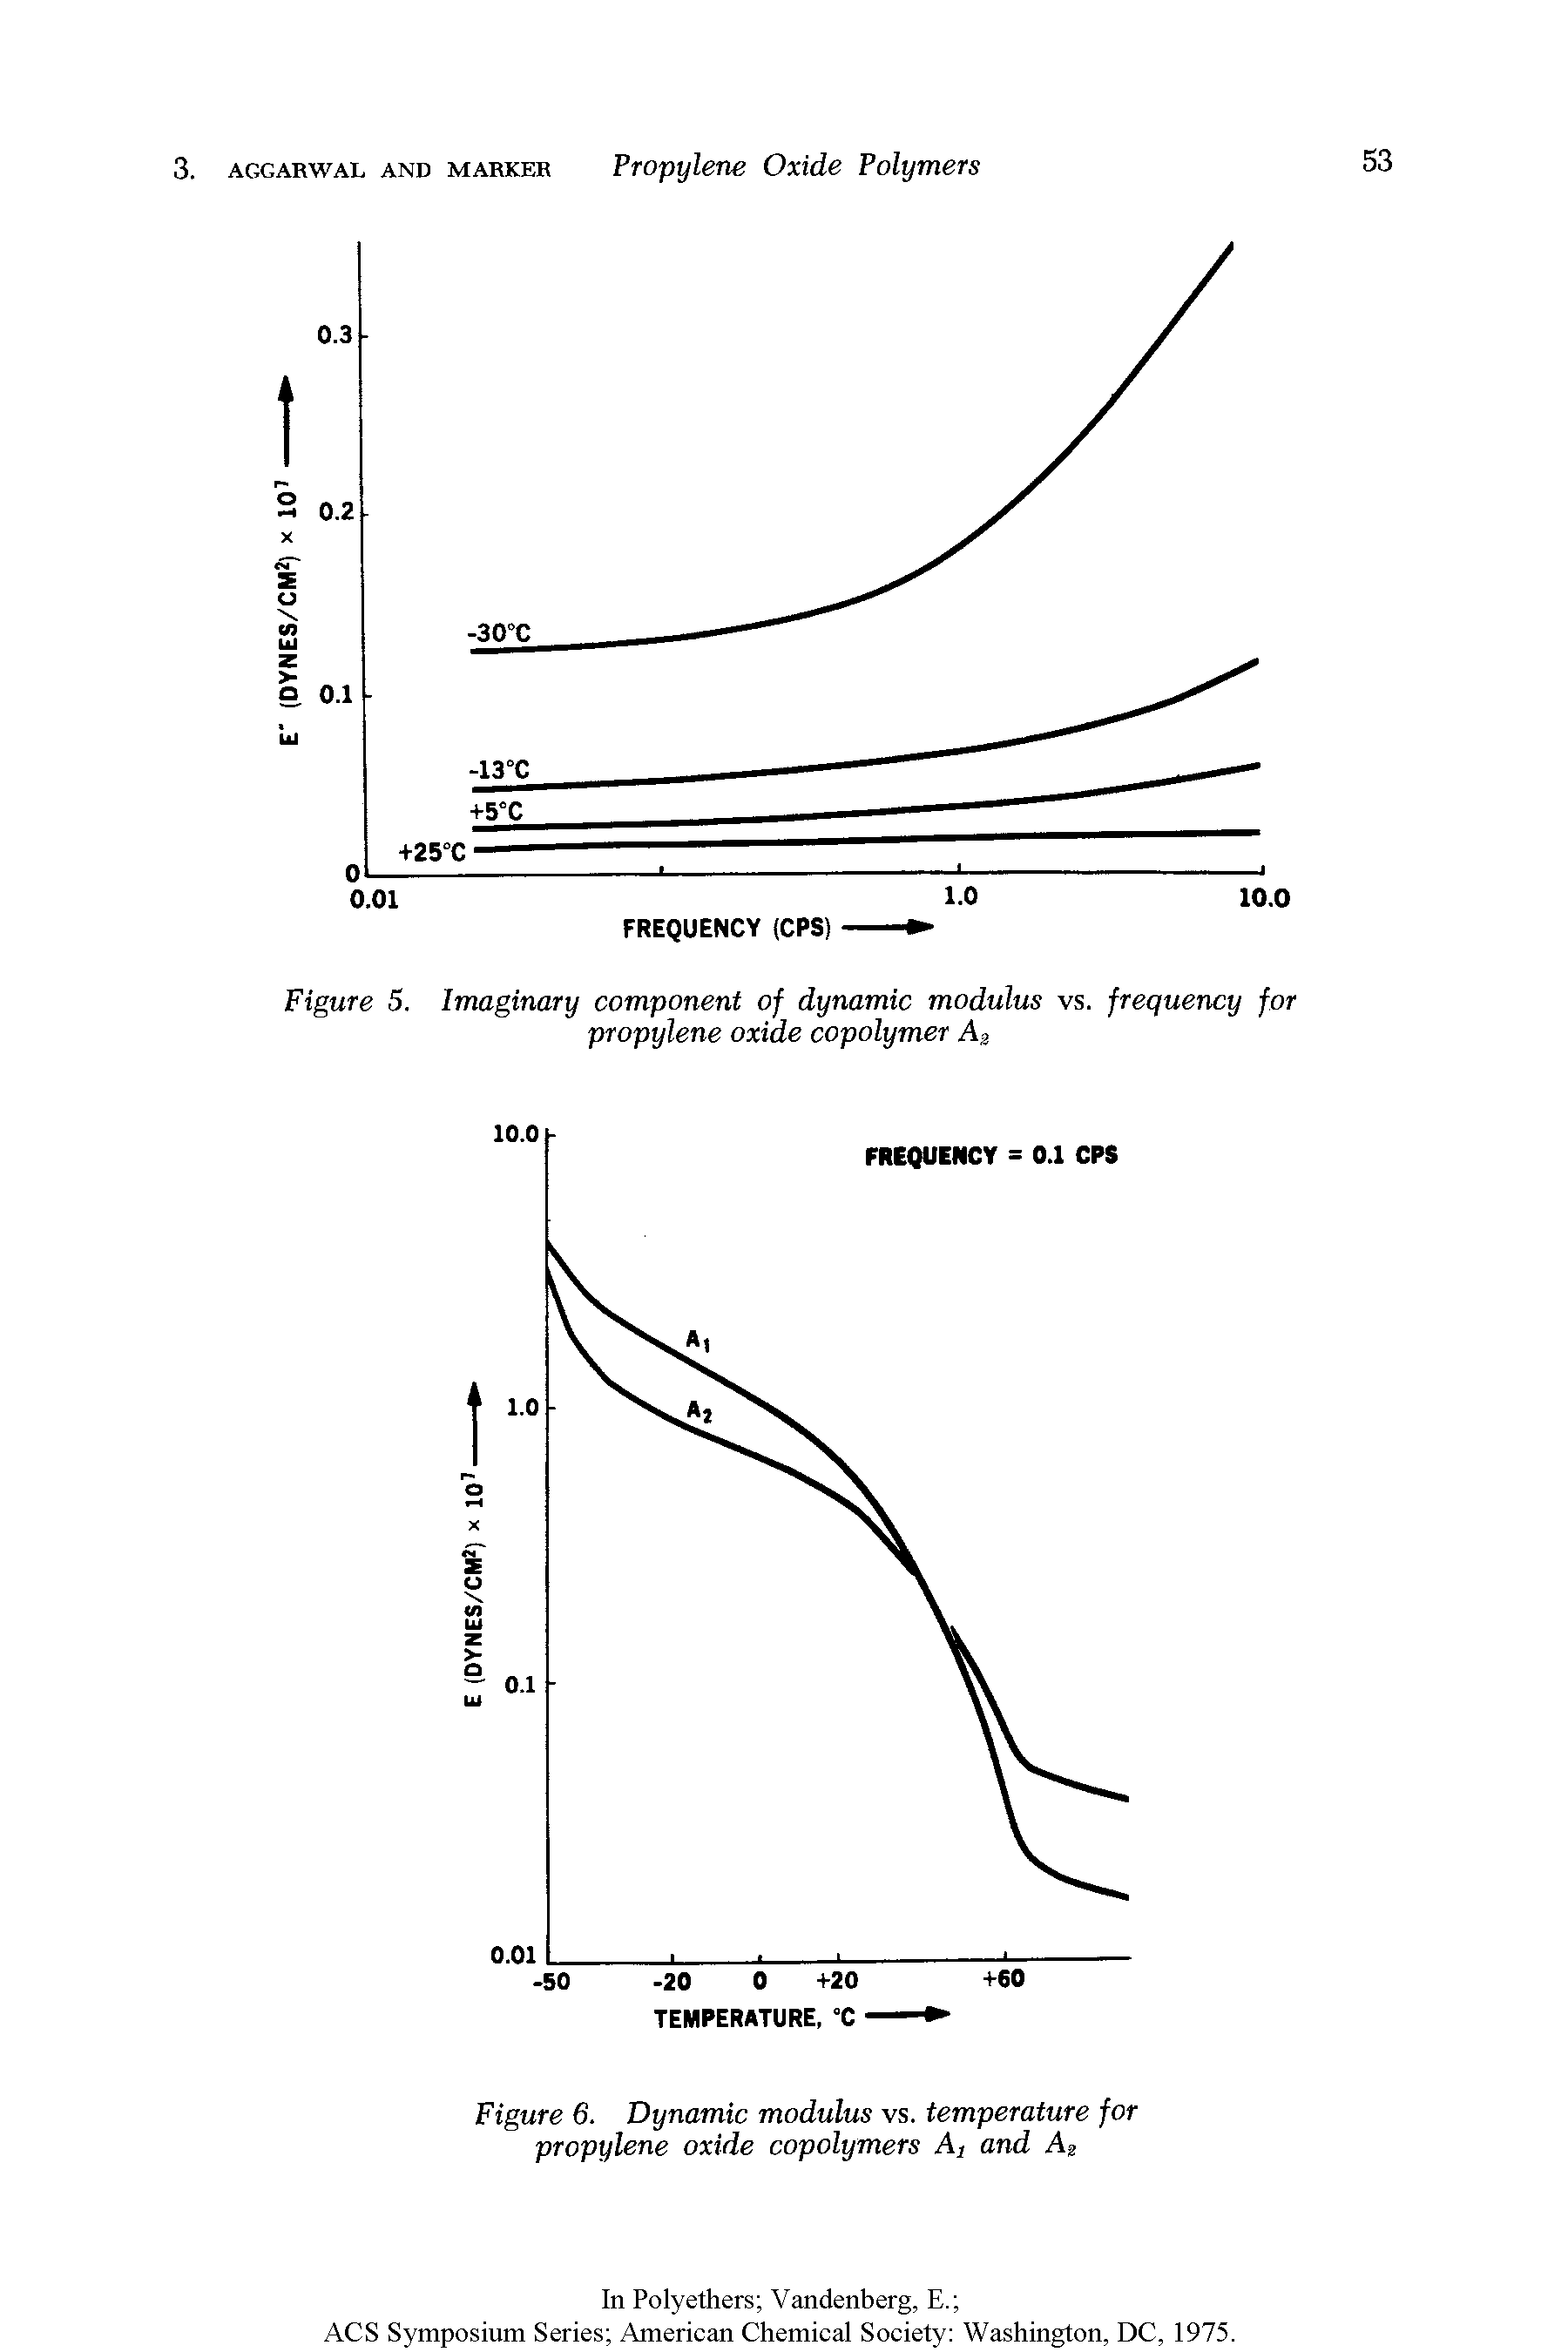 Figure 5. Imaginary component of dynamic modulus vs. frequency for propylene oxide copolymer...